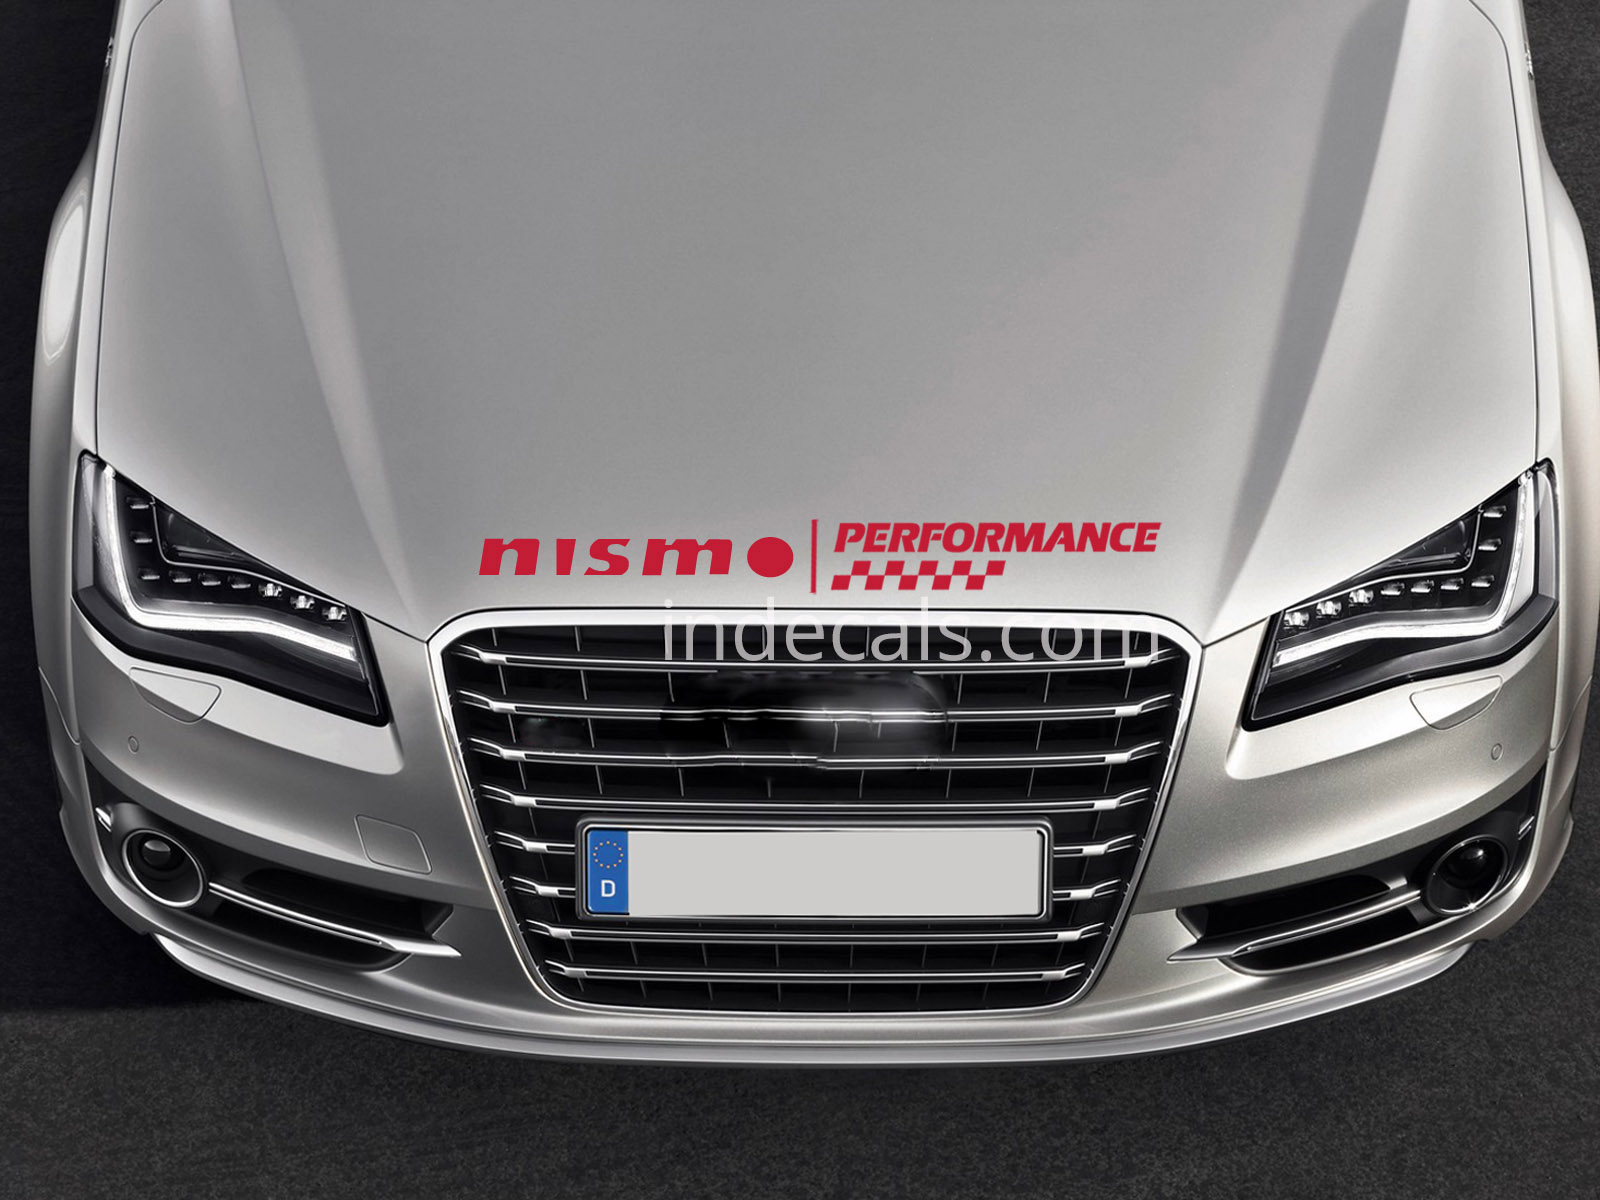 1 x Nismo Performance Sticker for Bonnet - Red